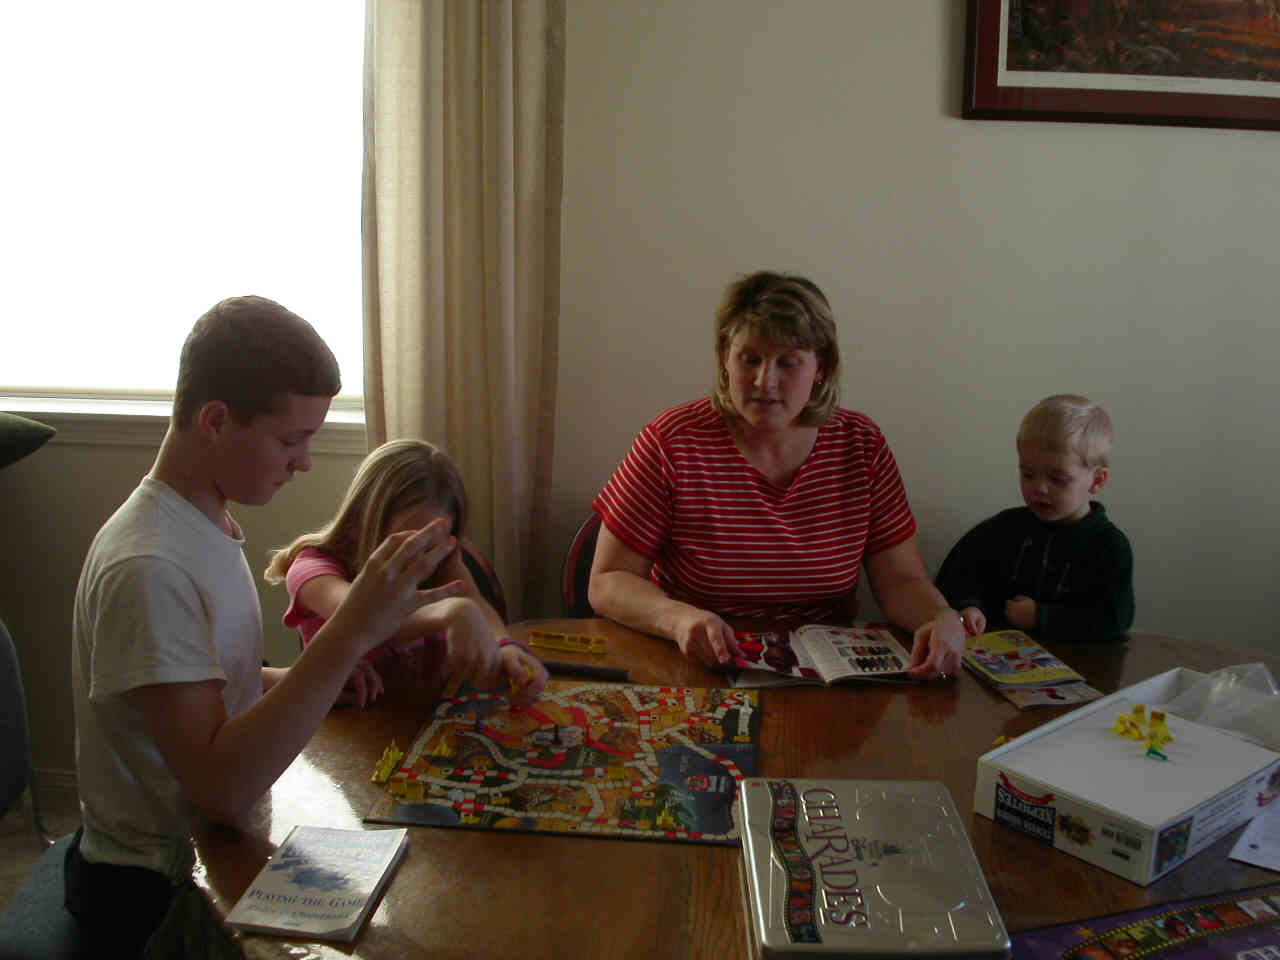 Favorite Pastime - Playing family games